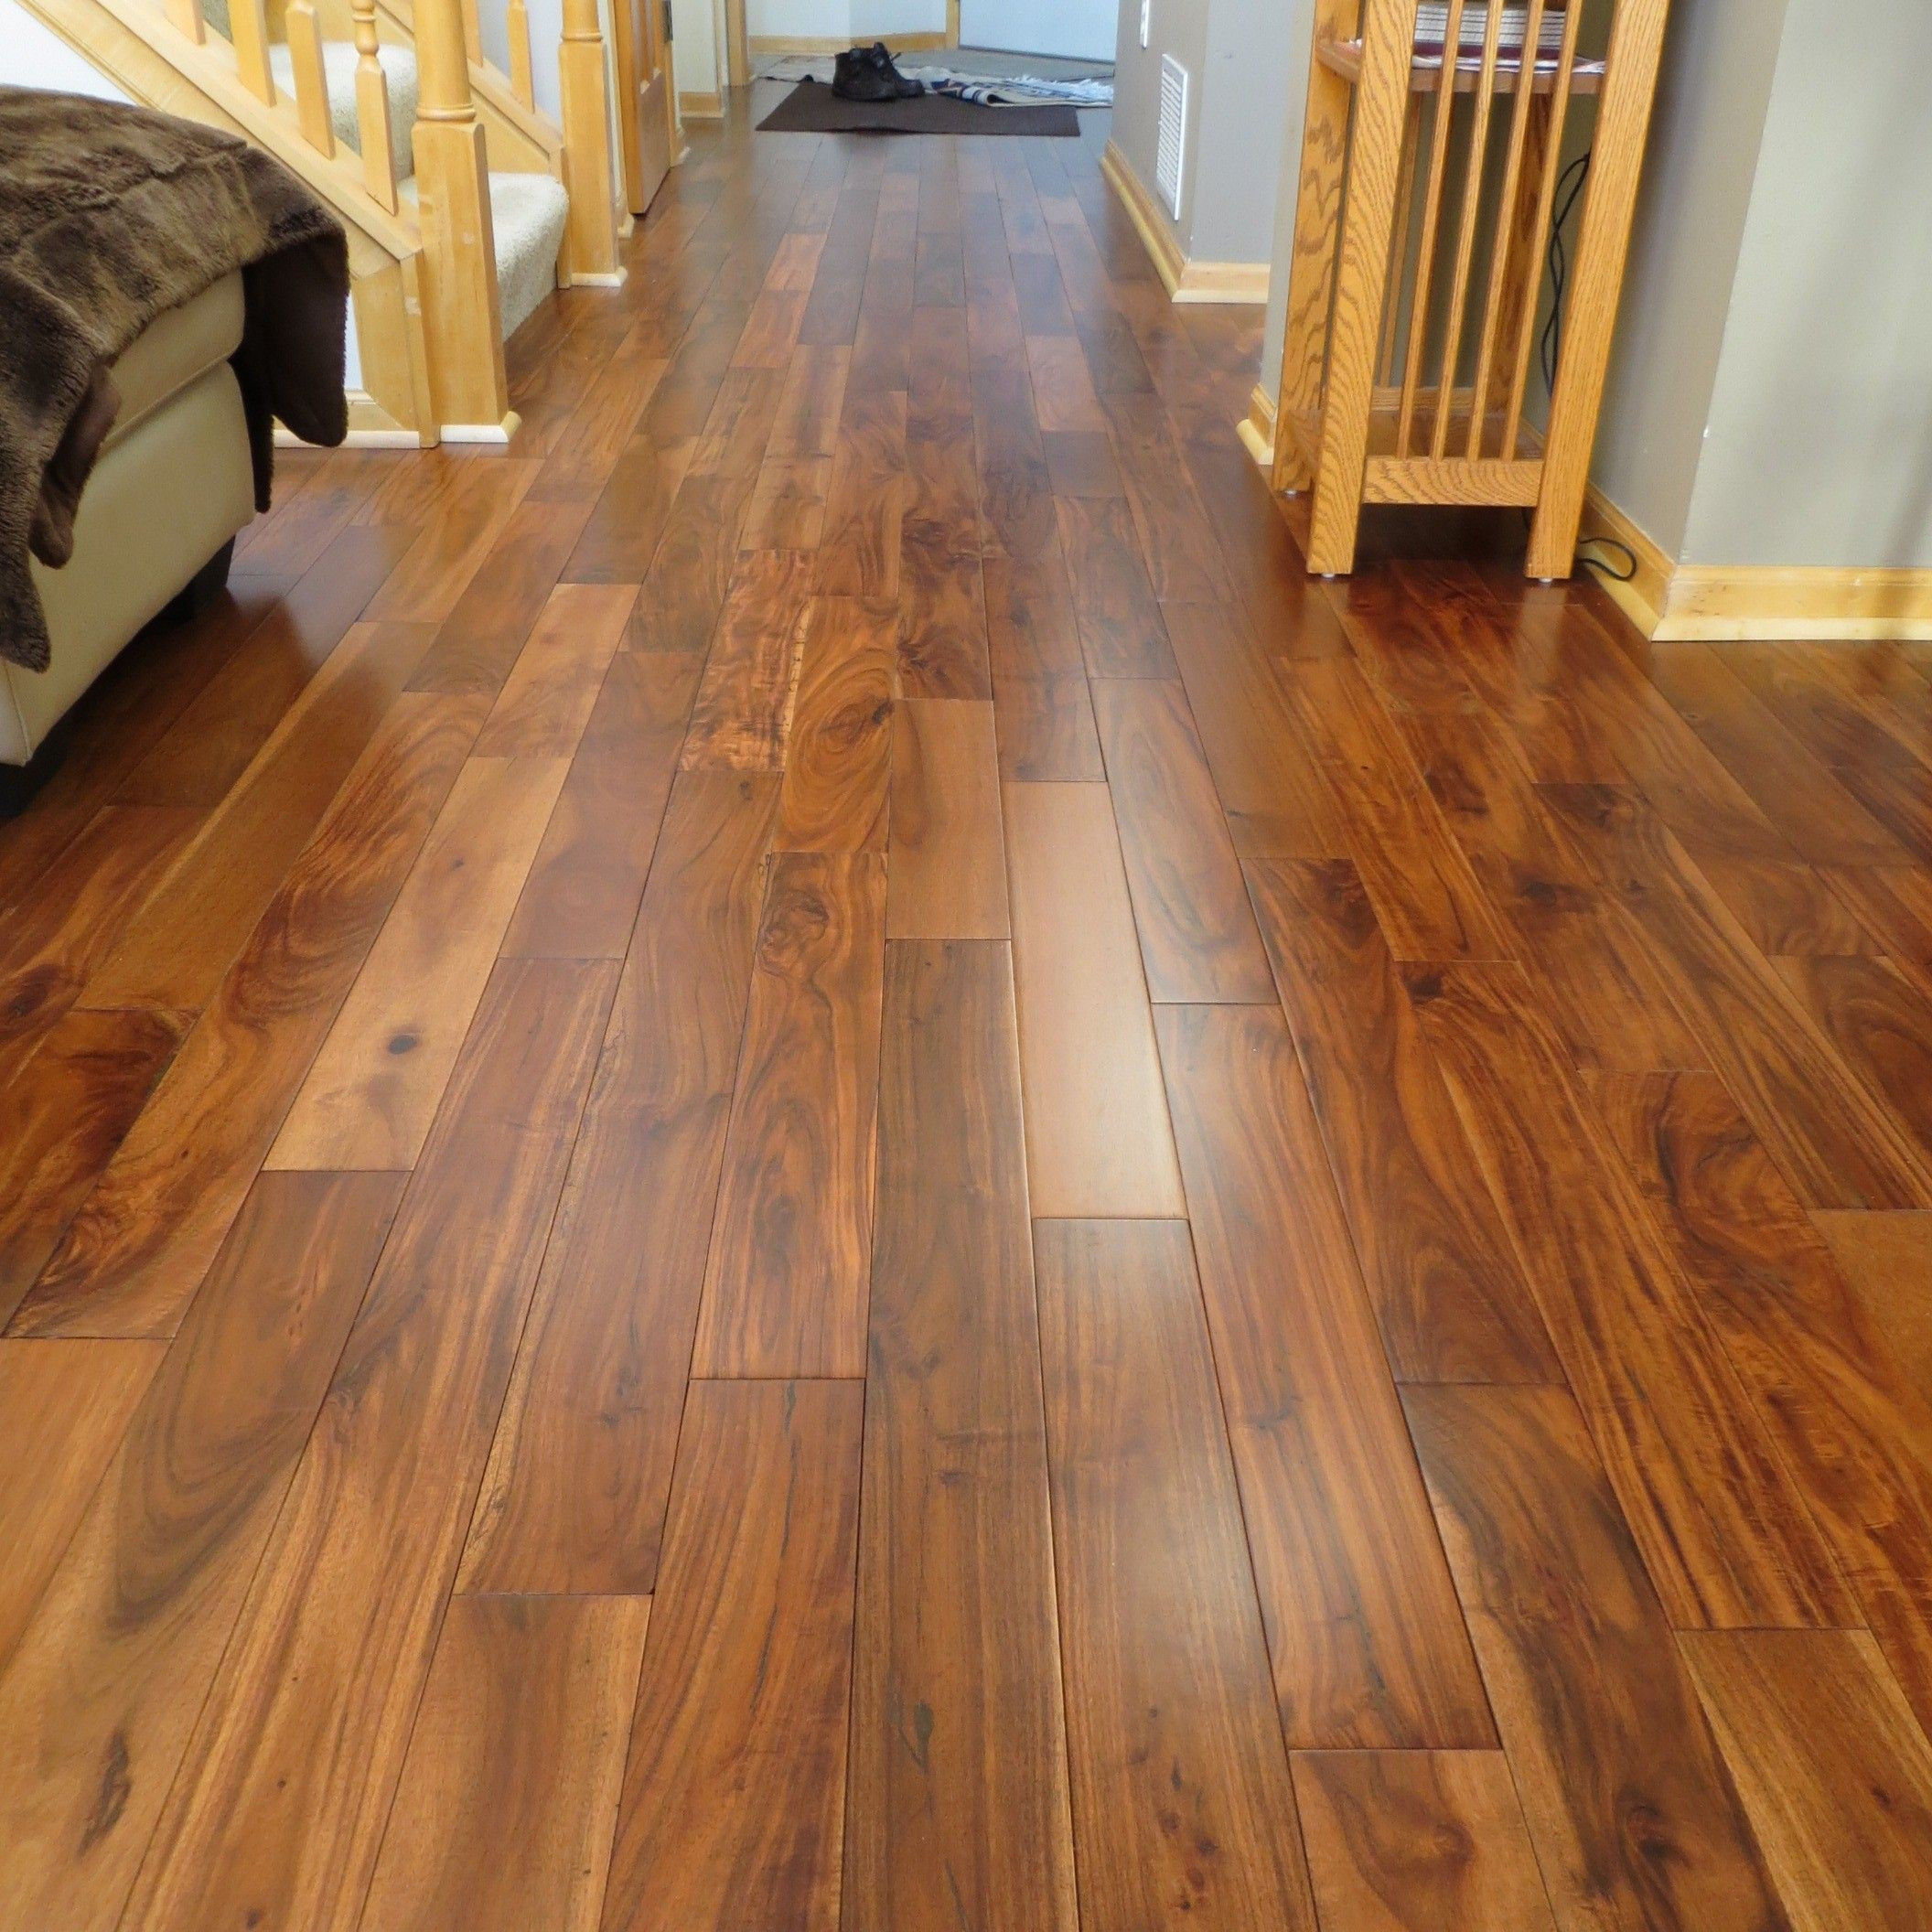 hardwood floor colors lowes of acacia wood flooring laminate wood flooring lowes laminate flooring intended for acacia asian walnut bronze plank hardwood flooring i loooooove this floor